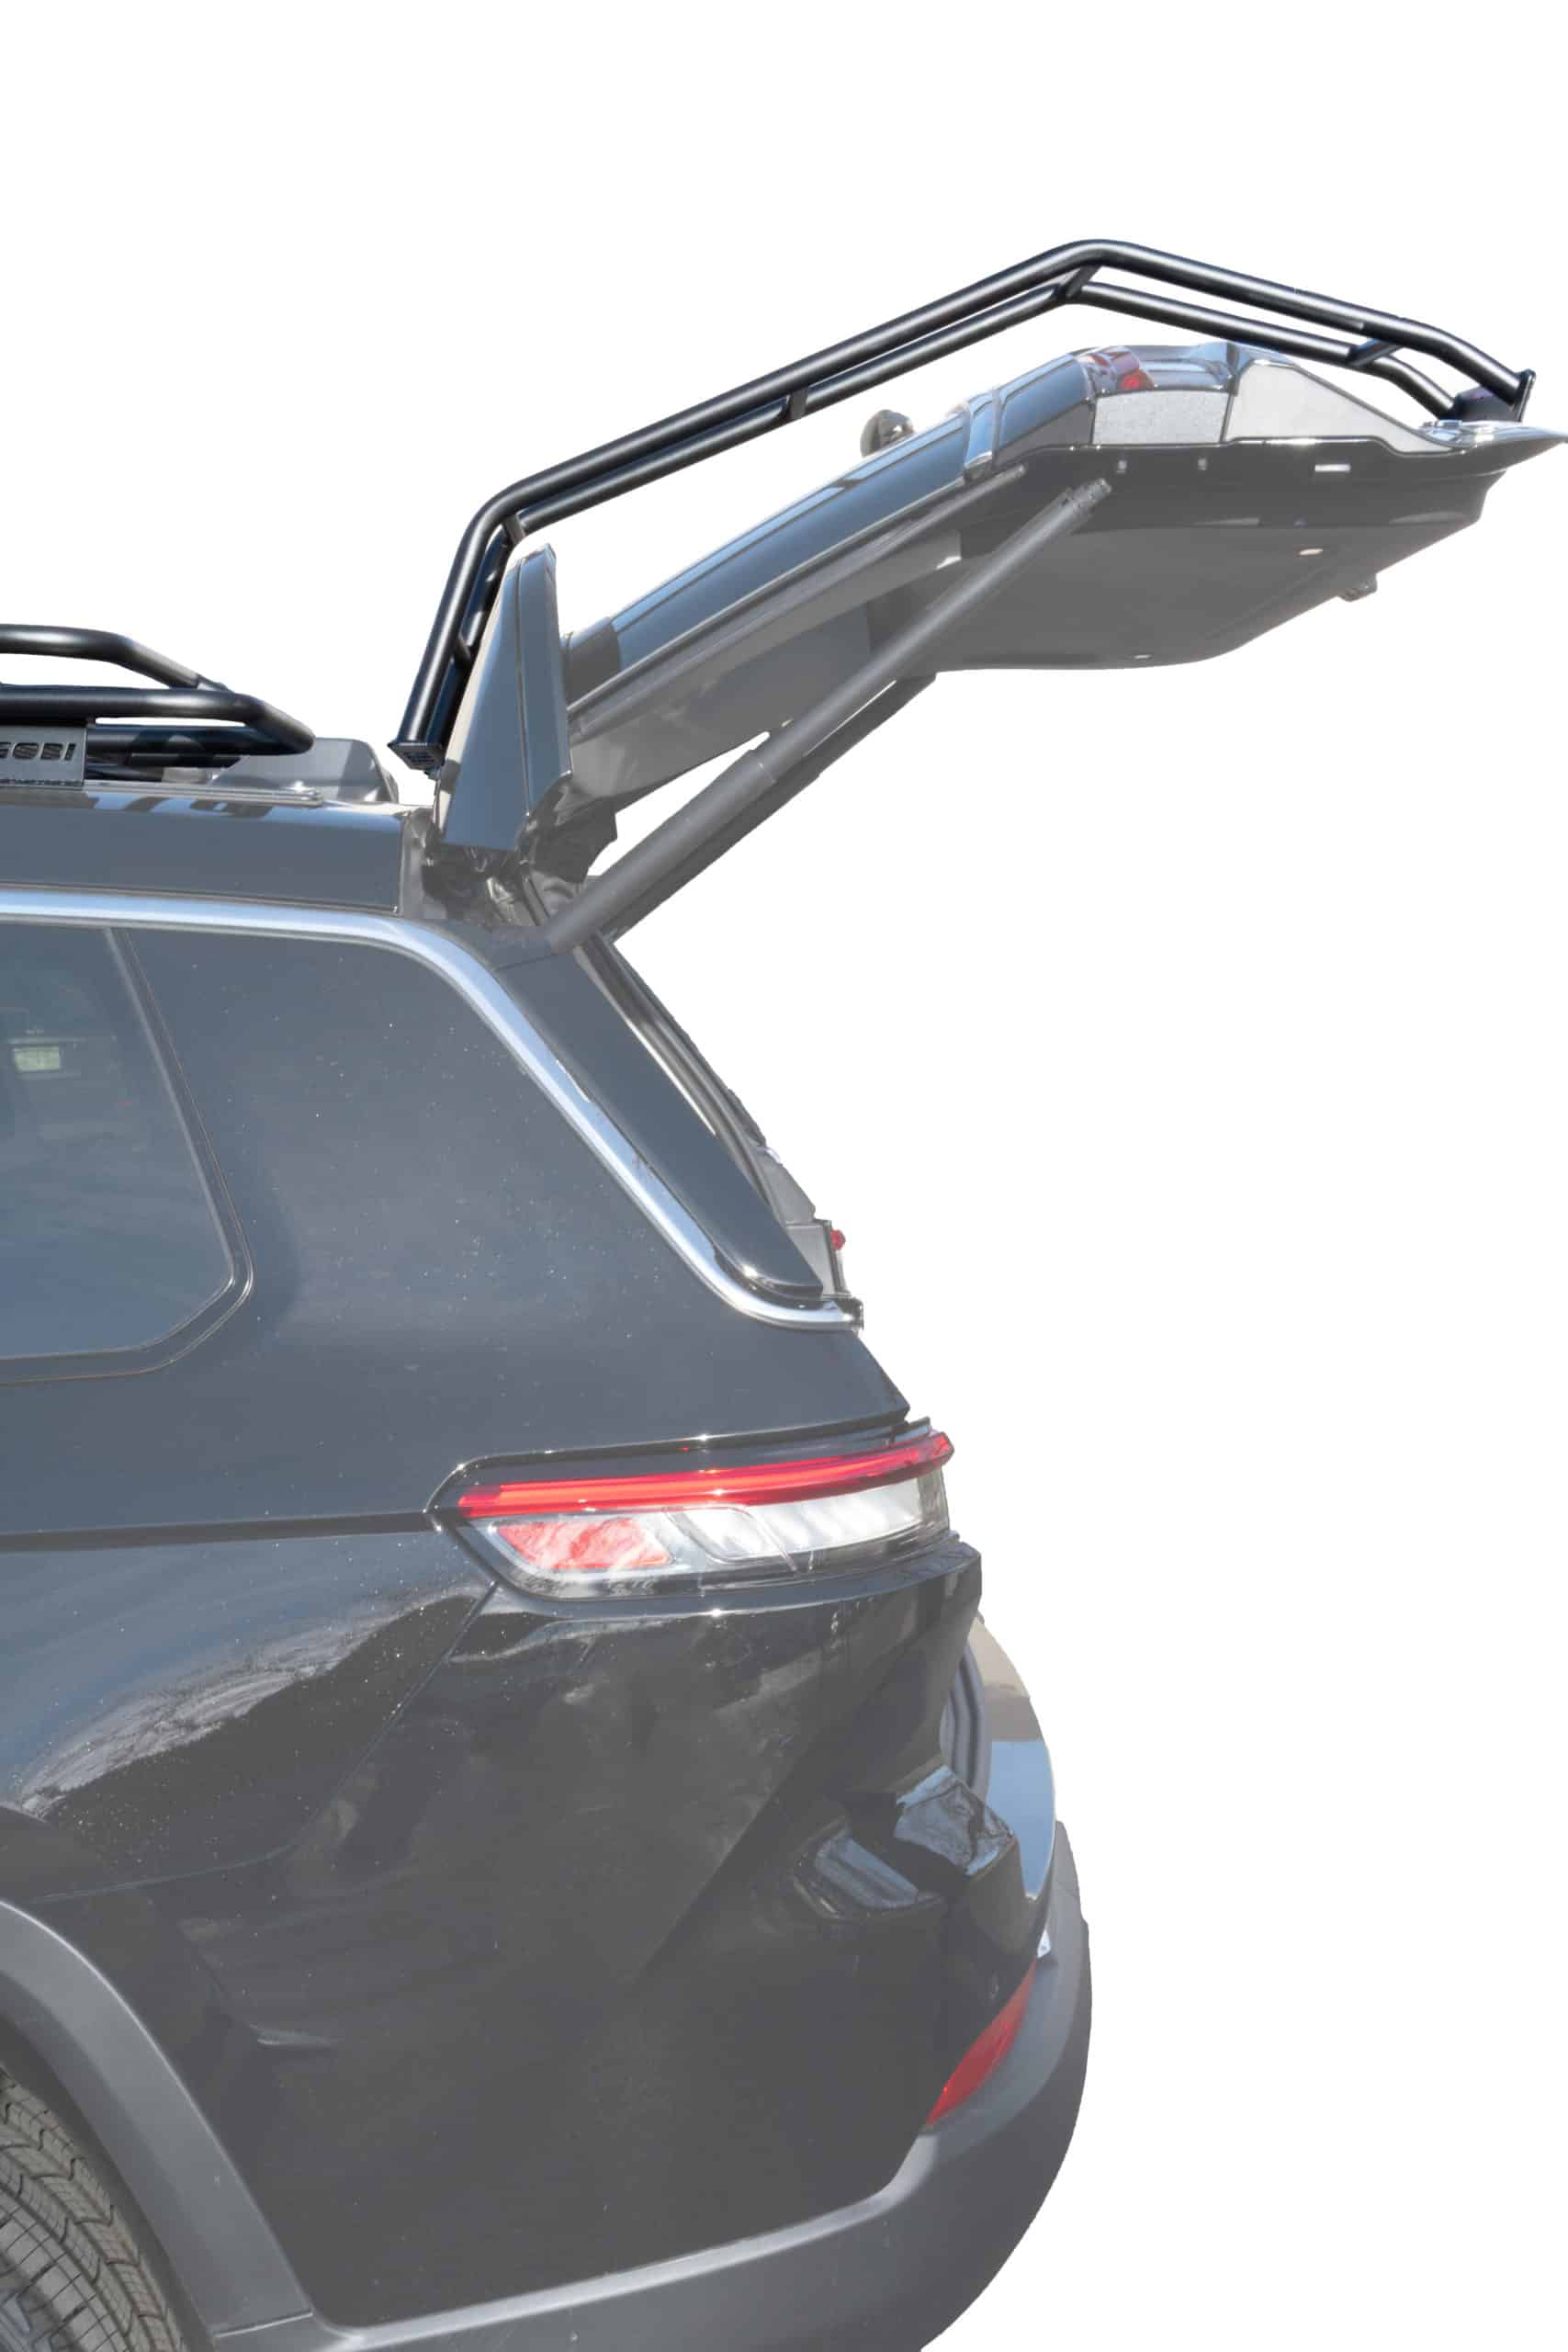 Jeep Grand Cherokee L Low-Profile 3-Row Roof Rack Multi Light No Sunroof - Stealth